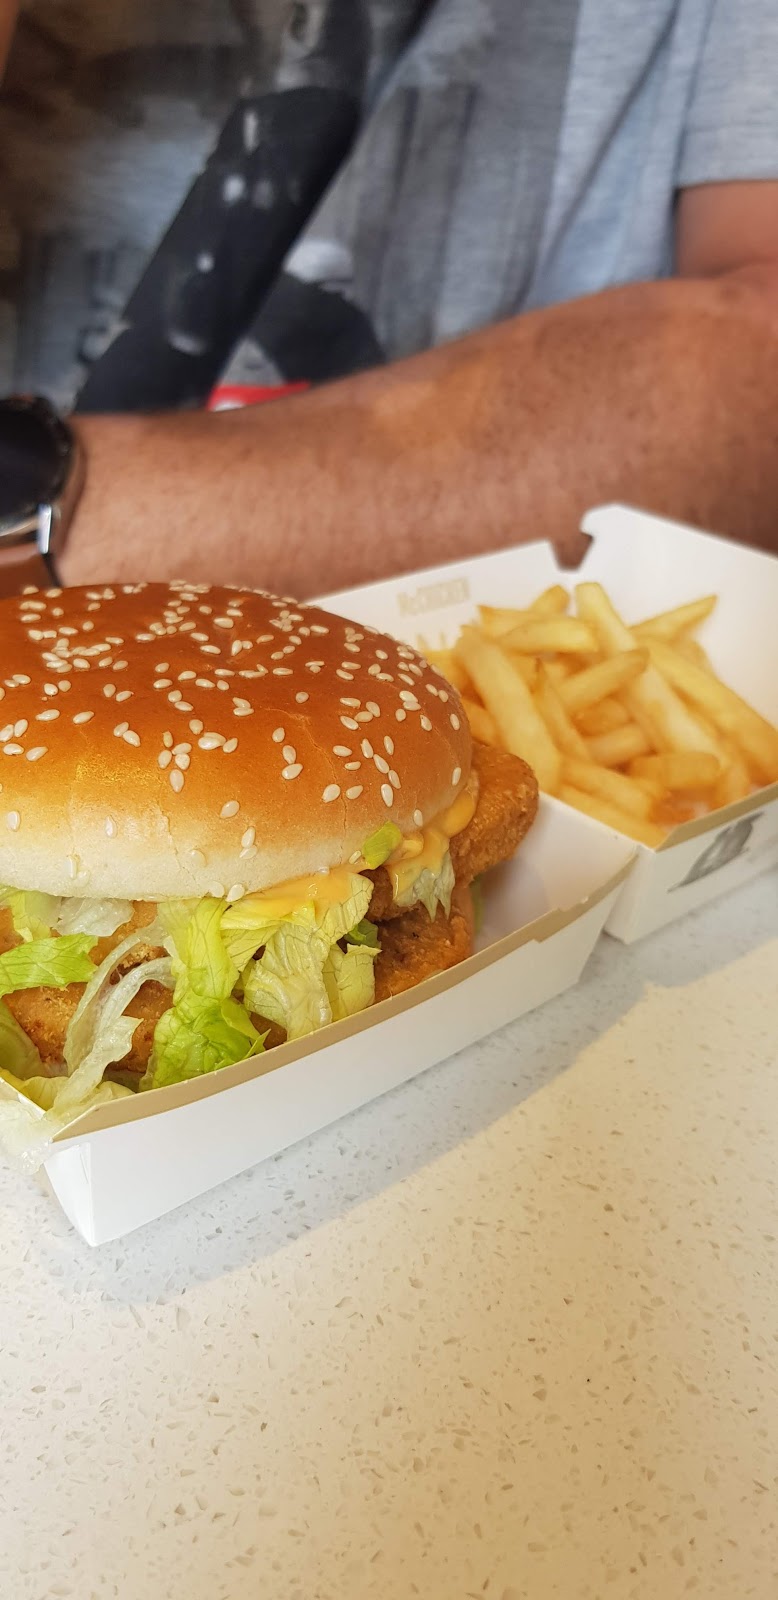 McDonalds Swan Hill | cafe | 424-426 Campbell St, Swan Hill VIC 3585, Australia | 0350321444 OR +61 3 5032 1444